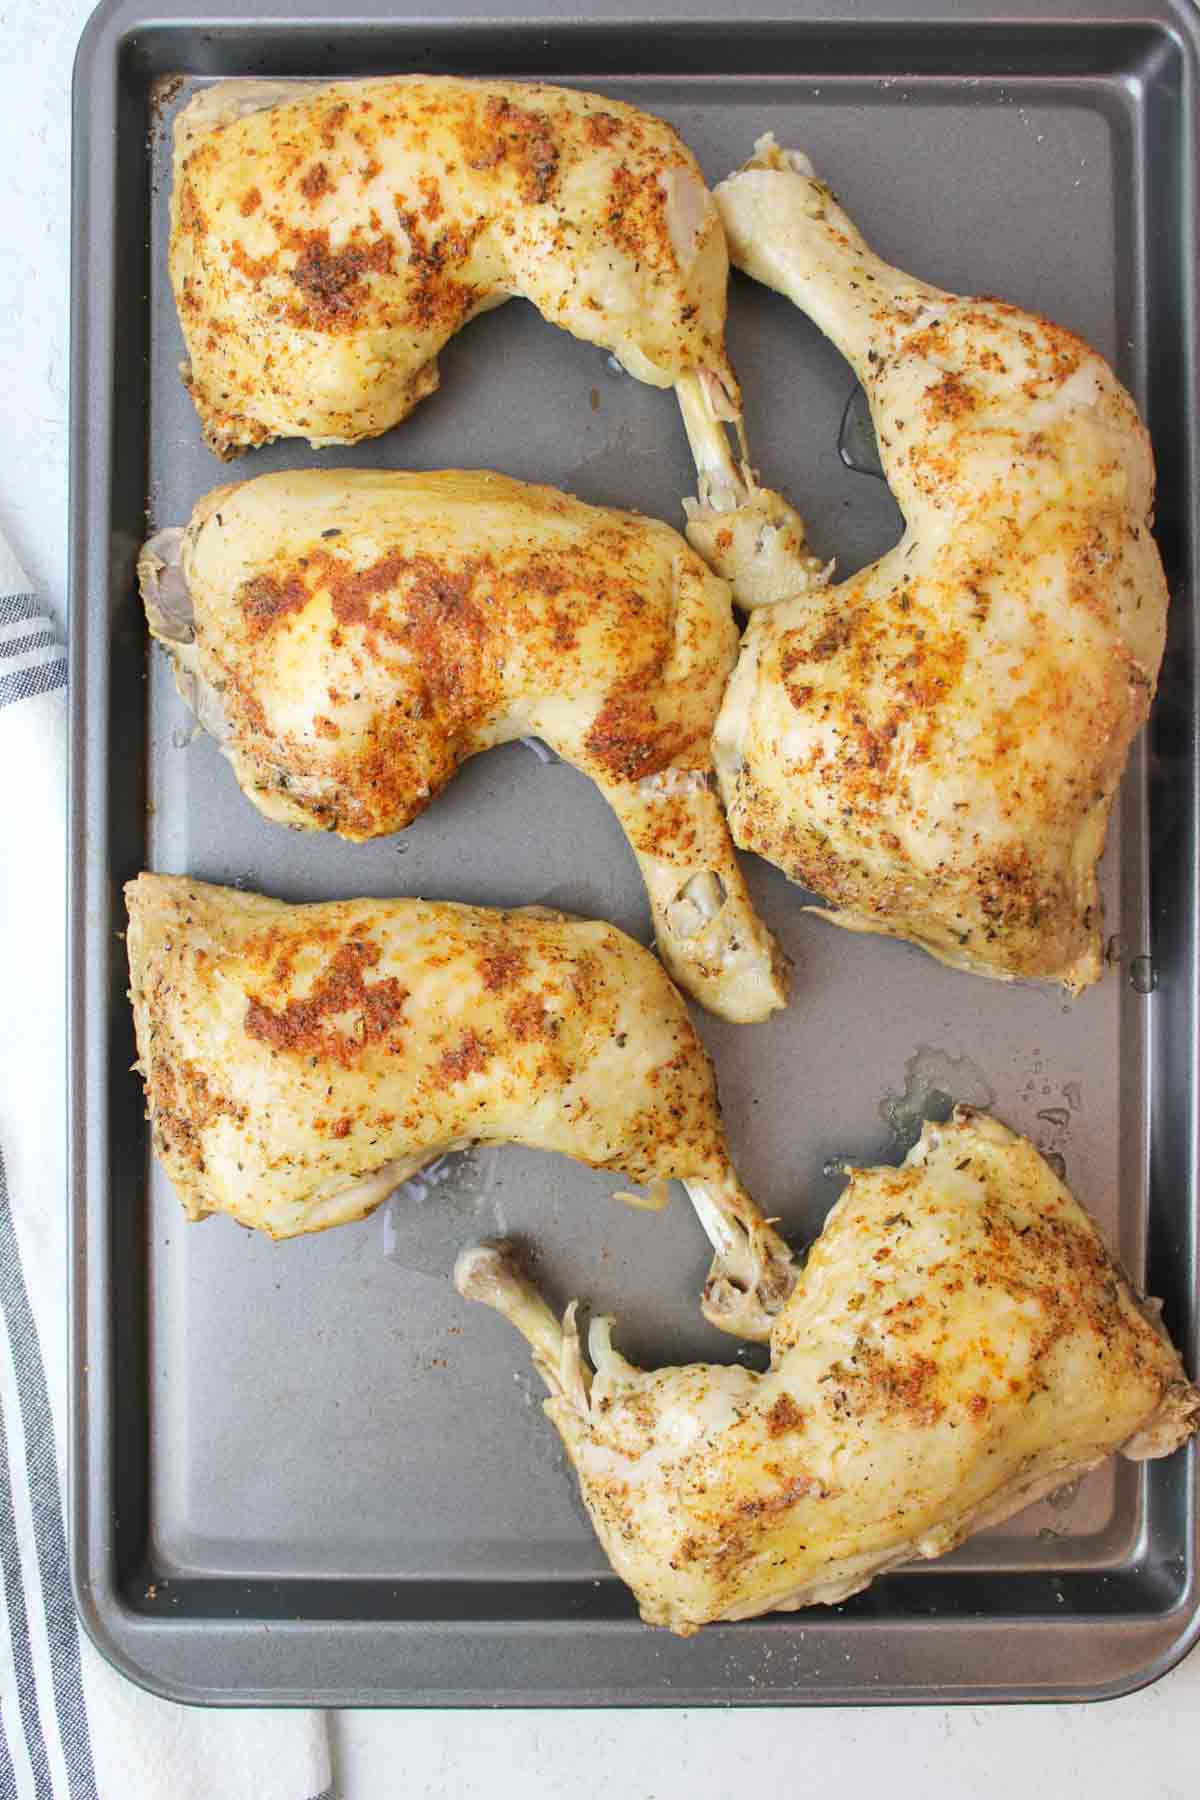 cooked chicken quarters on a baking sheet.